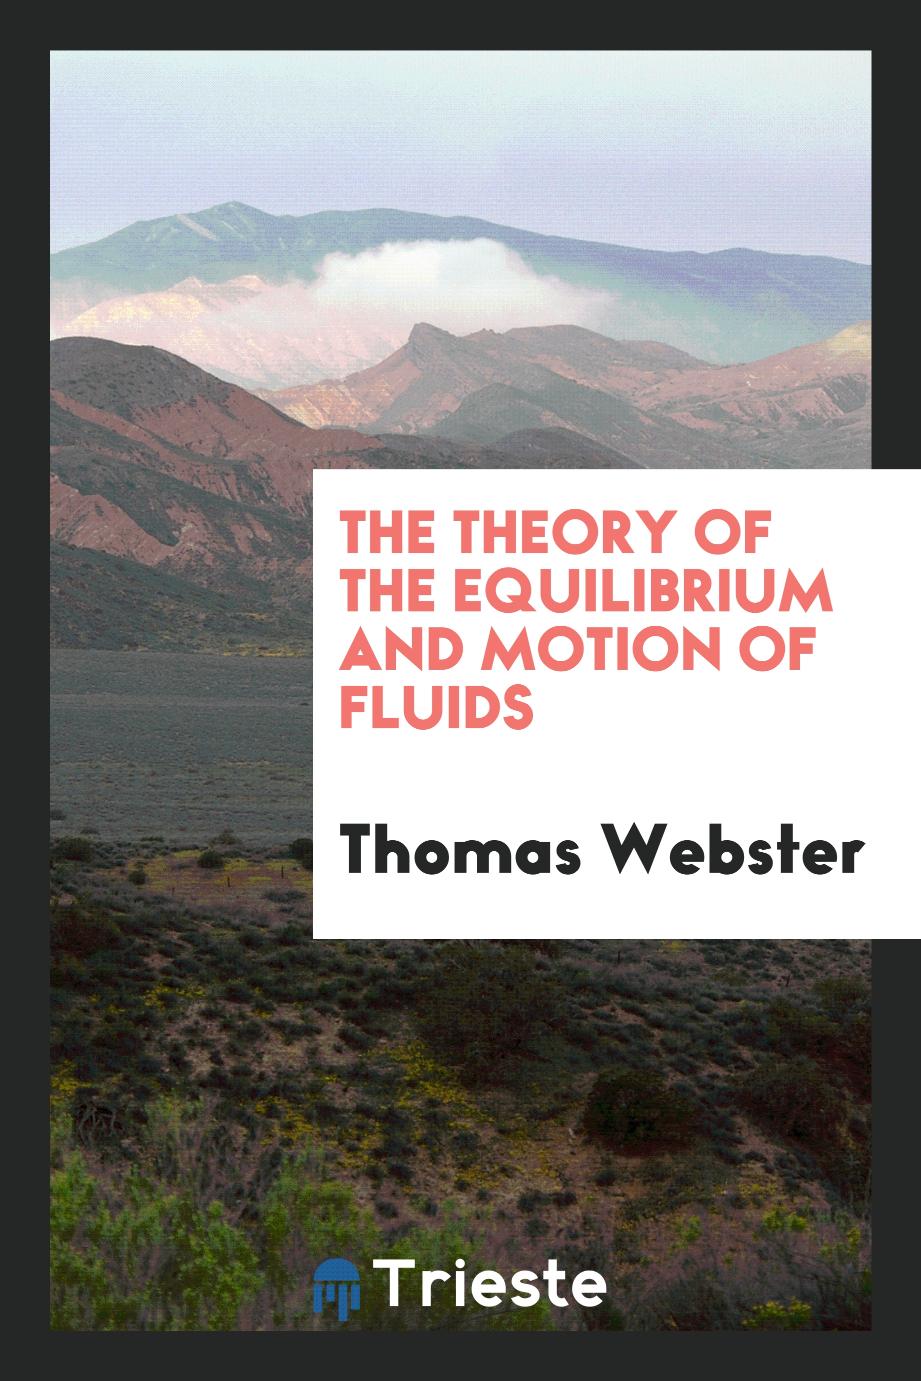 The theory of the equilibrium and motion of fluids